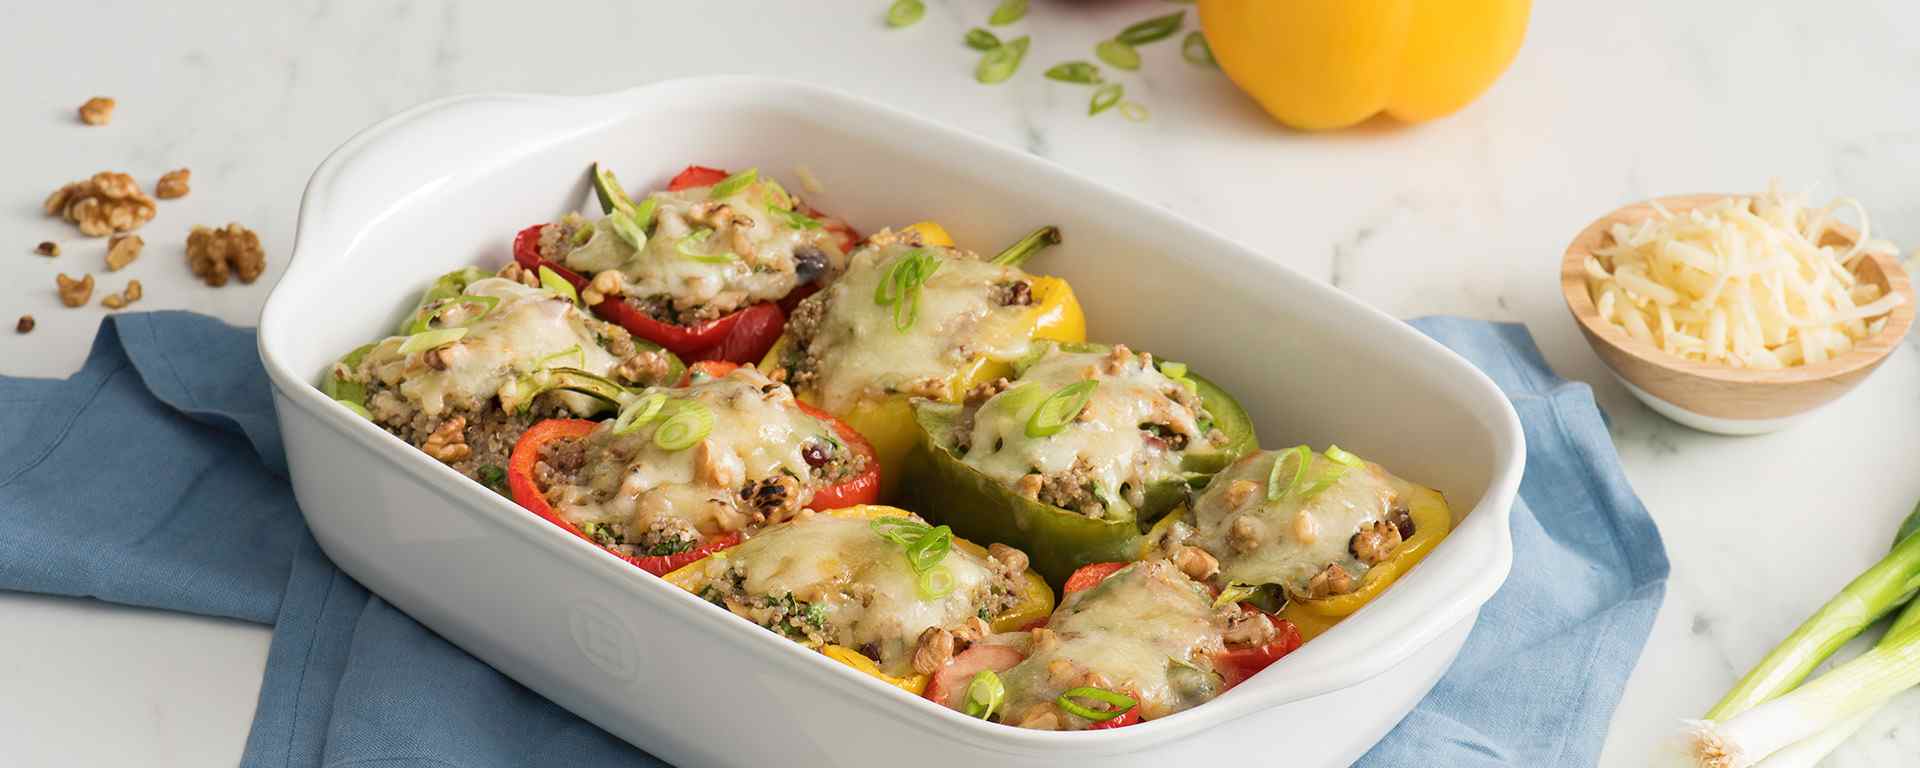 Photo for - Cheesy Quinoa-Stuffed Peppers